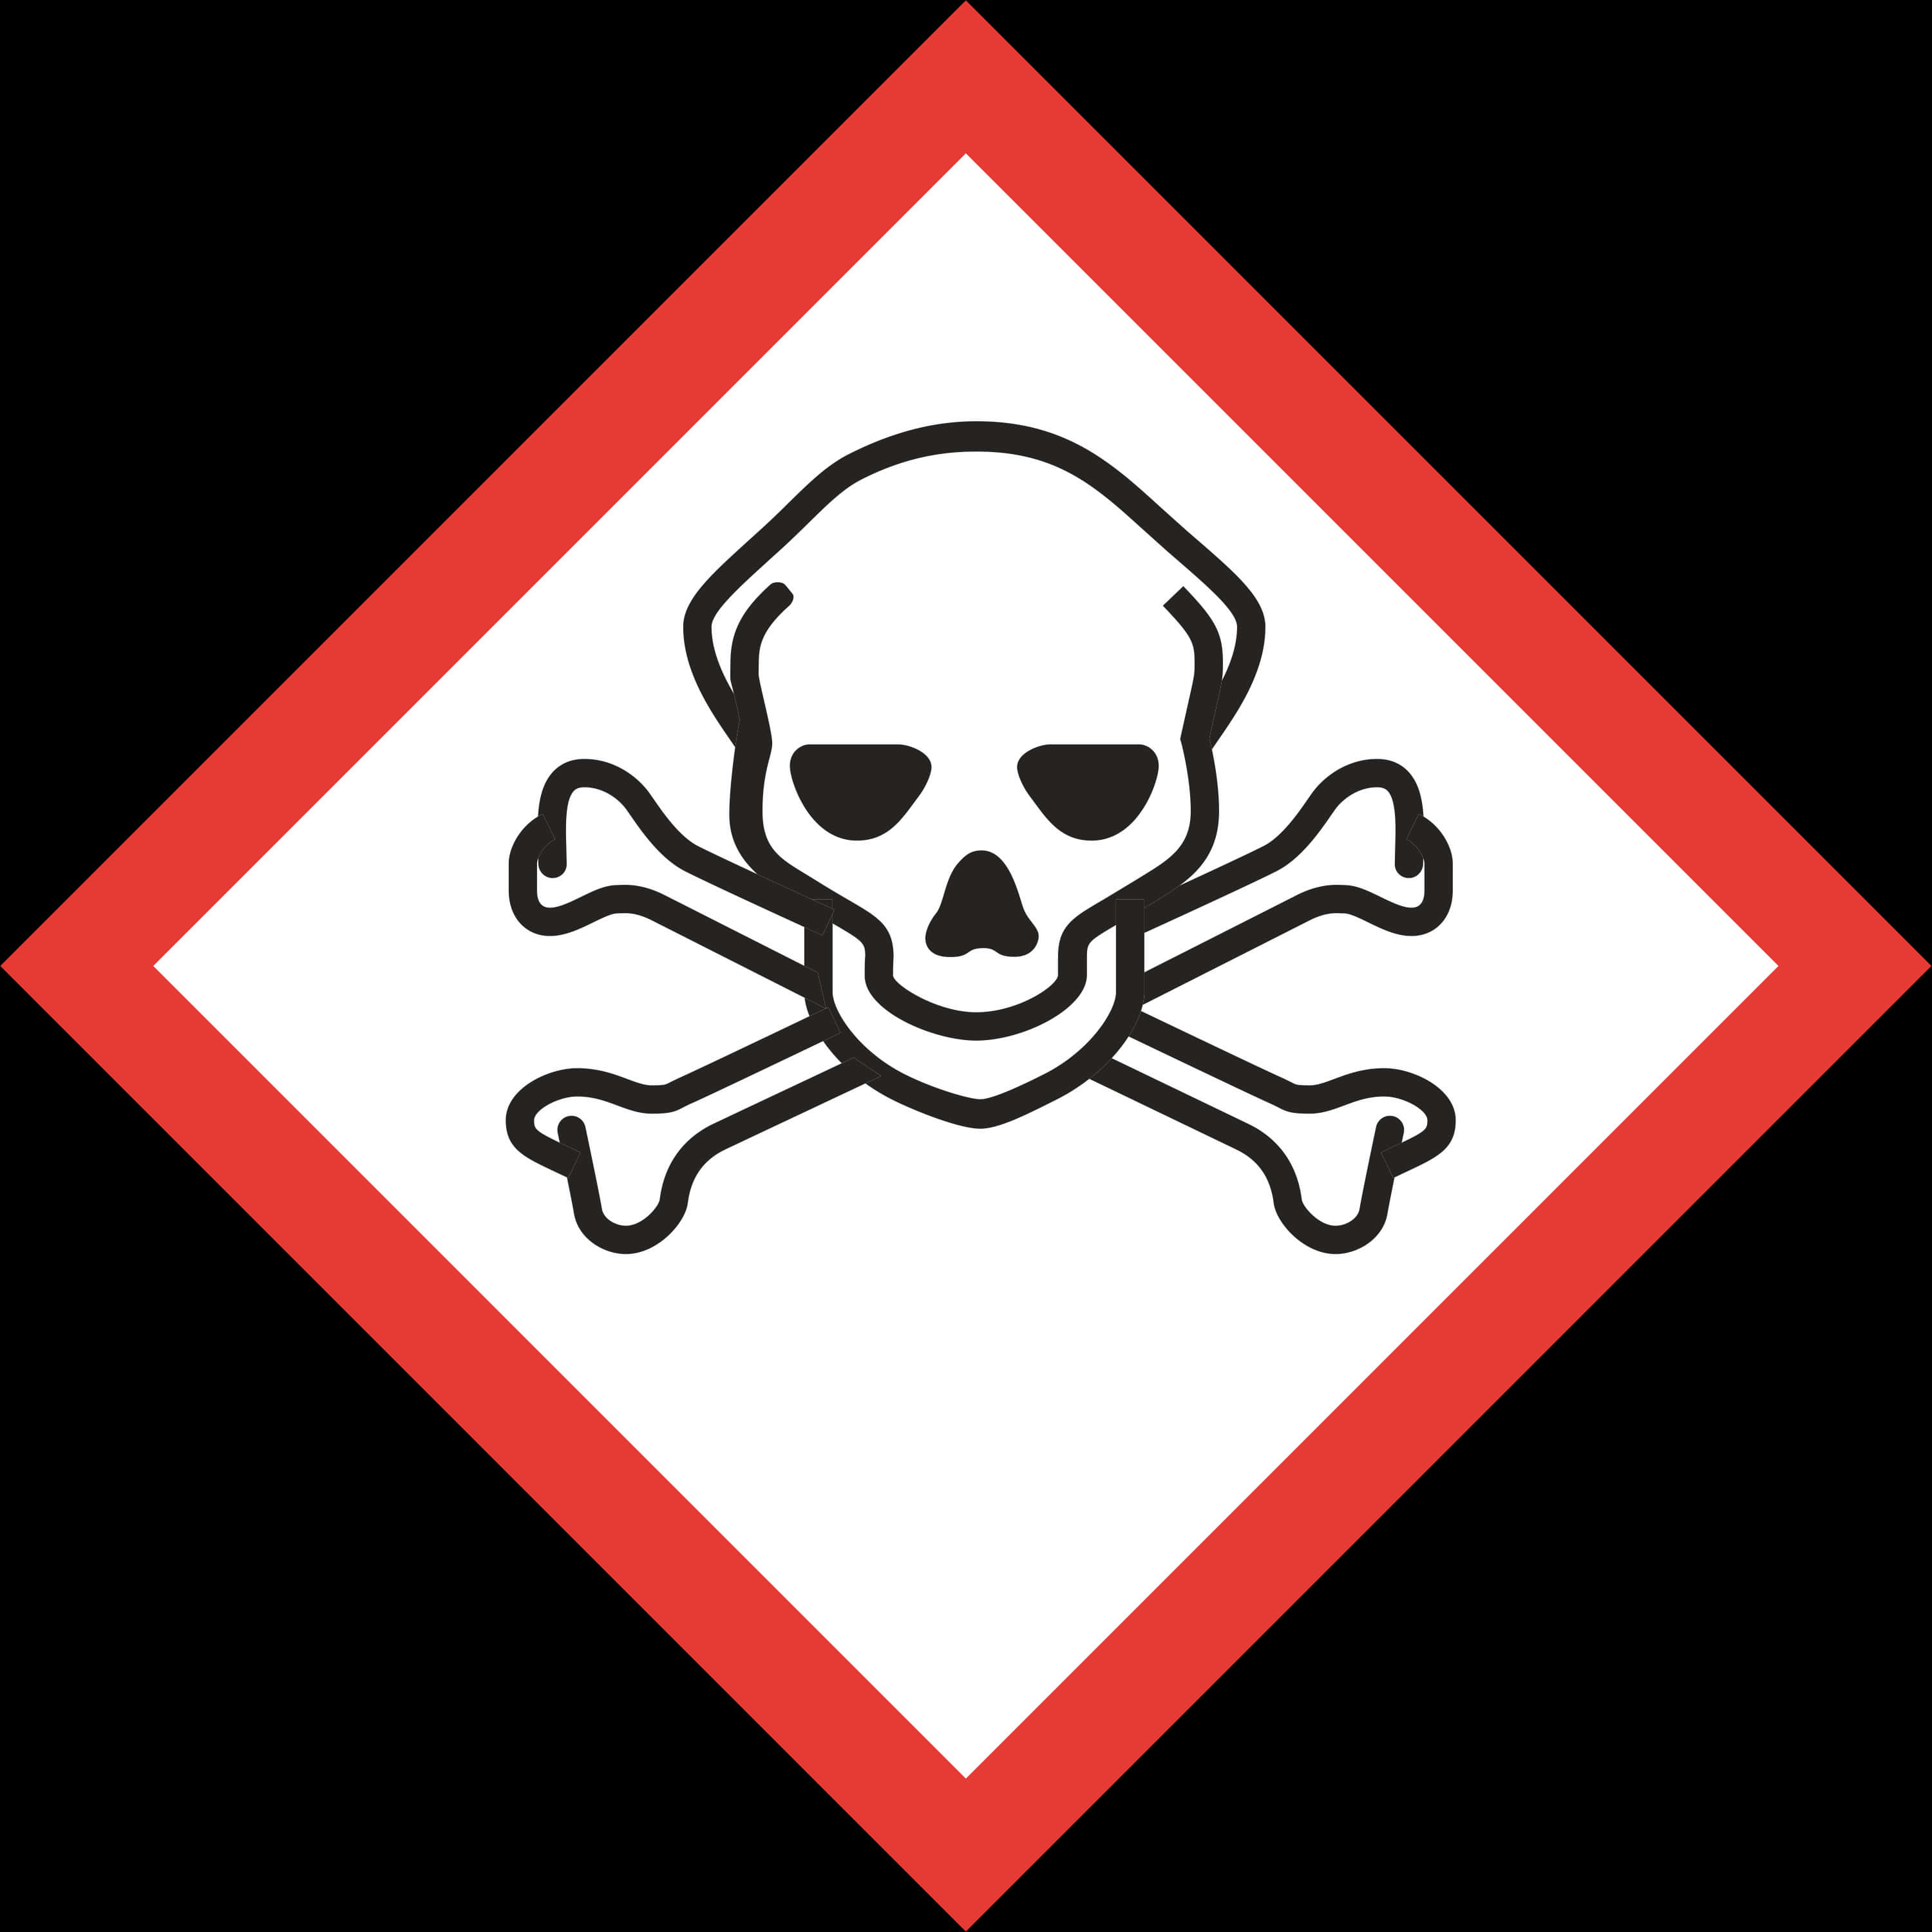 A Sign With A Skull And Crossbones In A Red And White Diamond